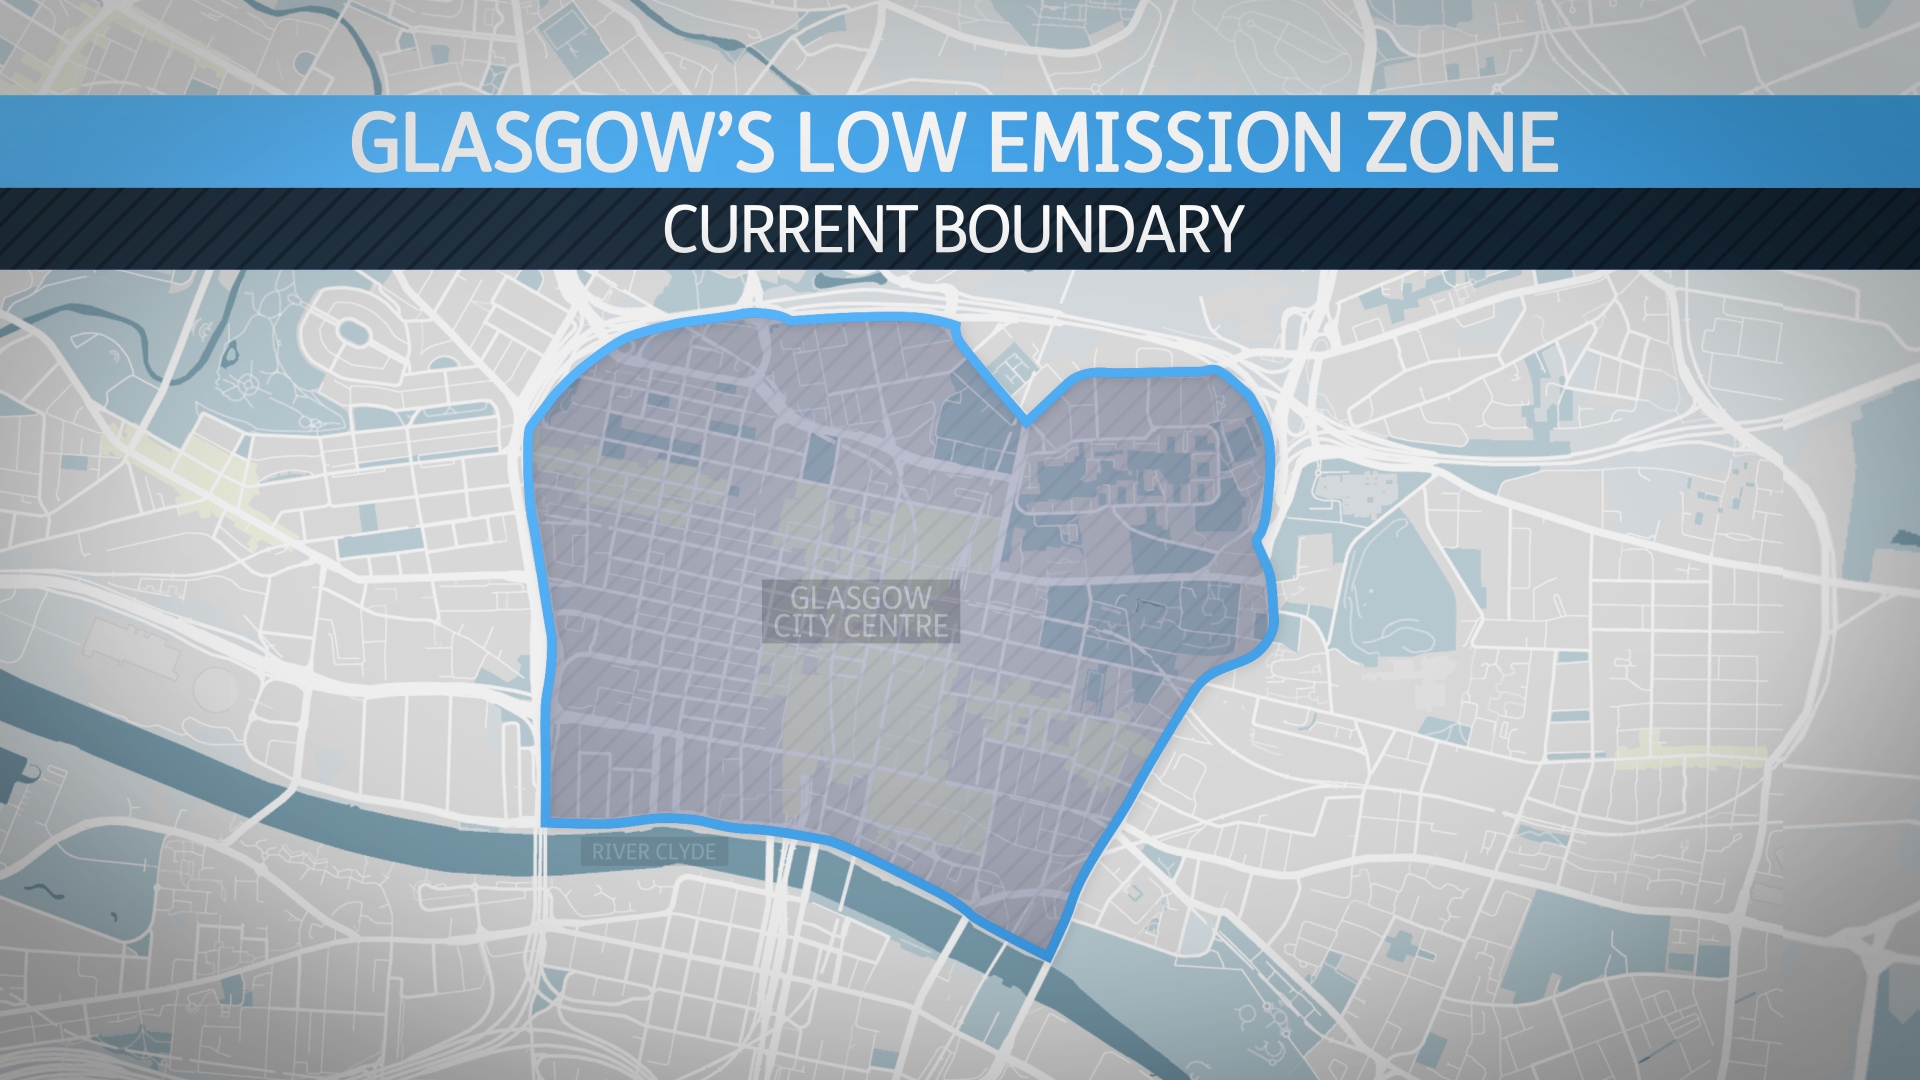 The Low Emission Zone covers almost all of Glasgow city centre.